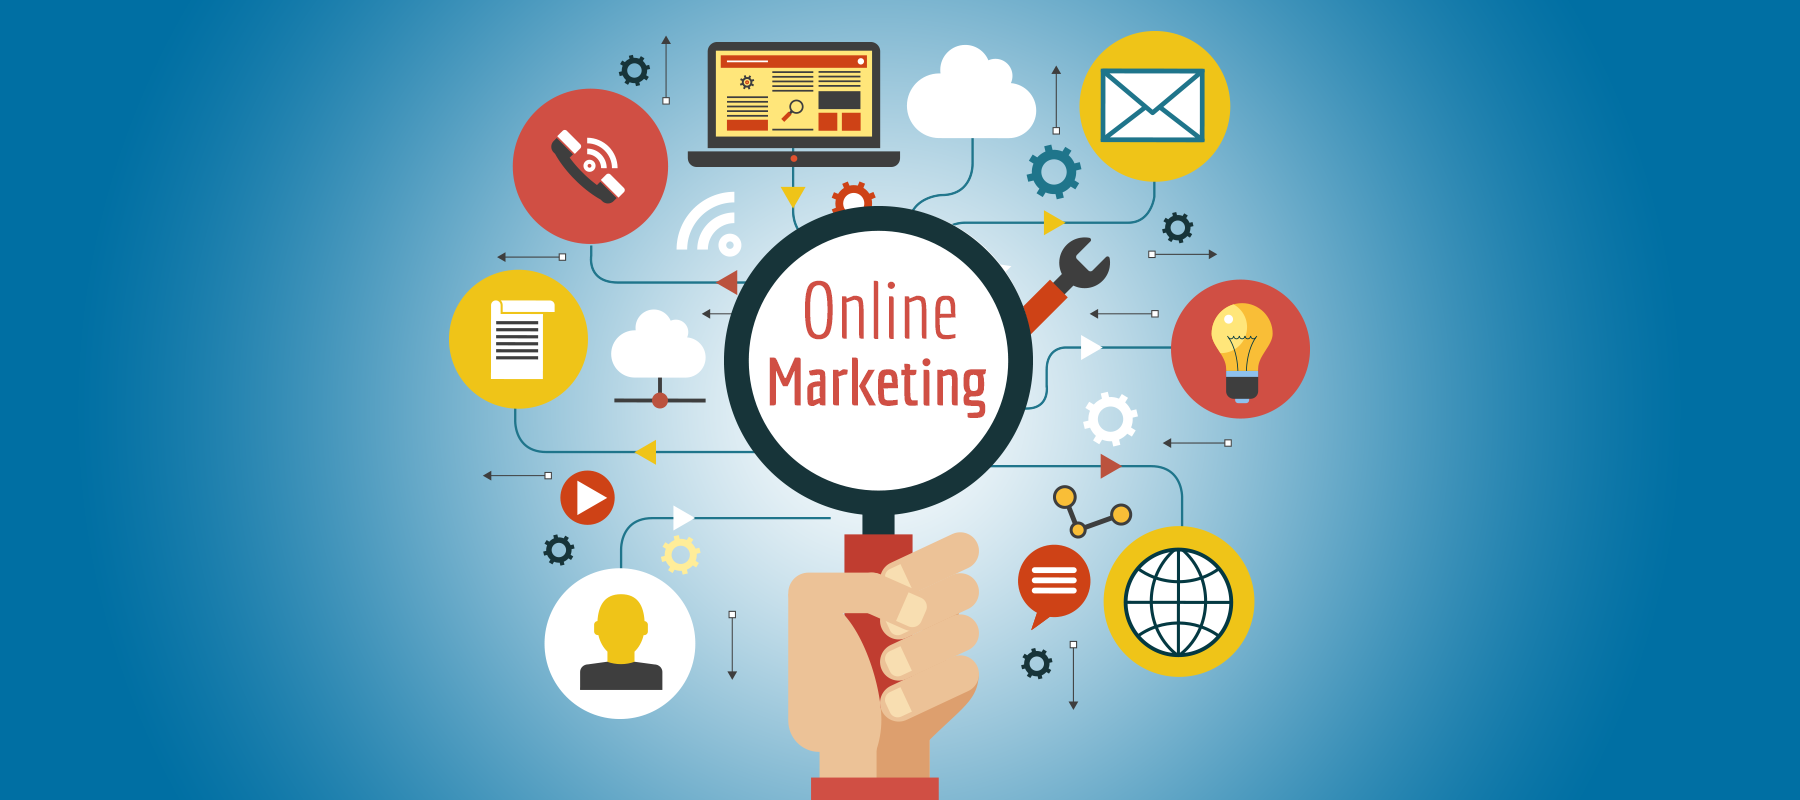 7 Free Online Marketing Tools for Small Businesses